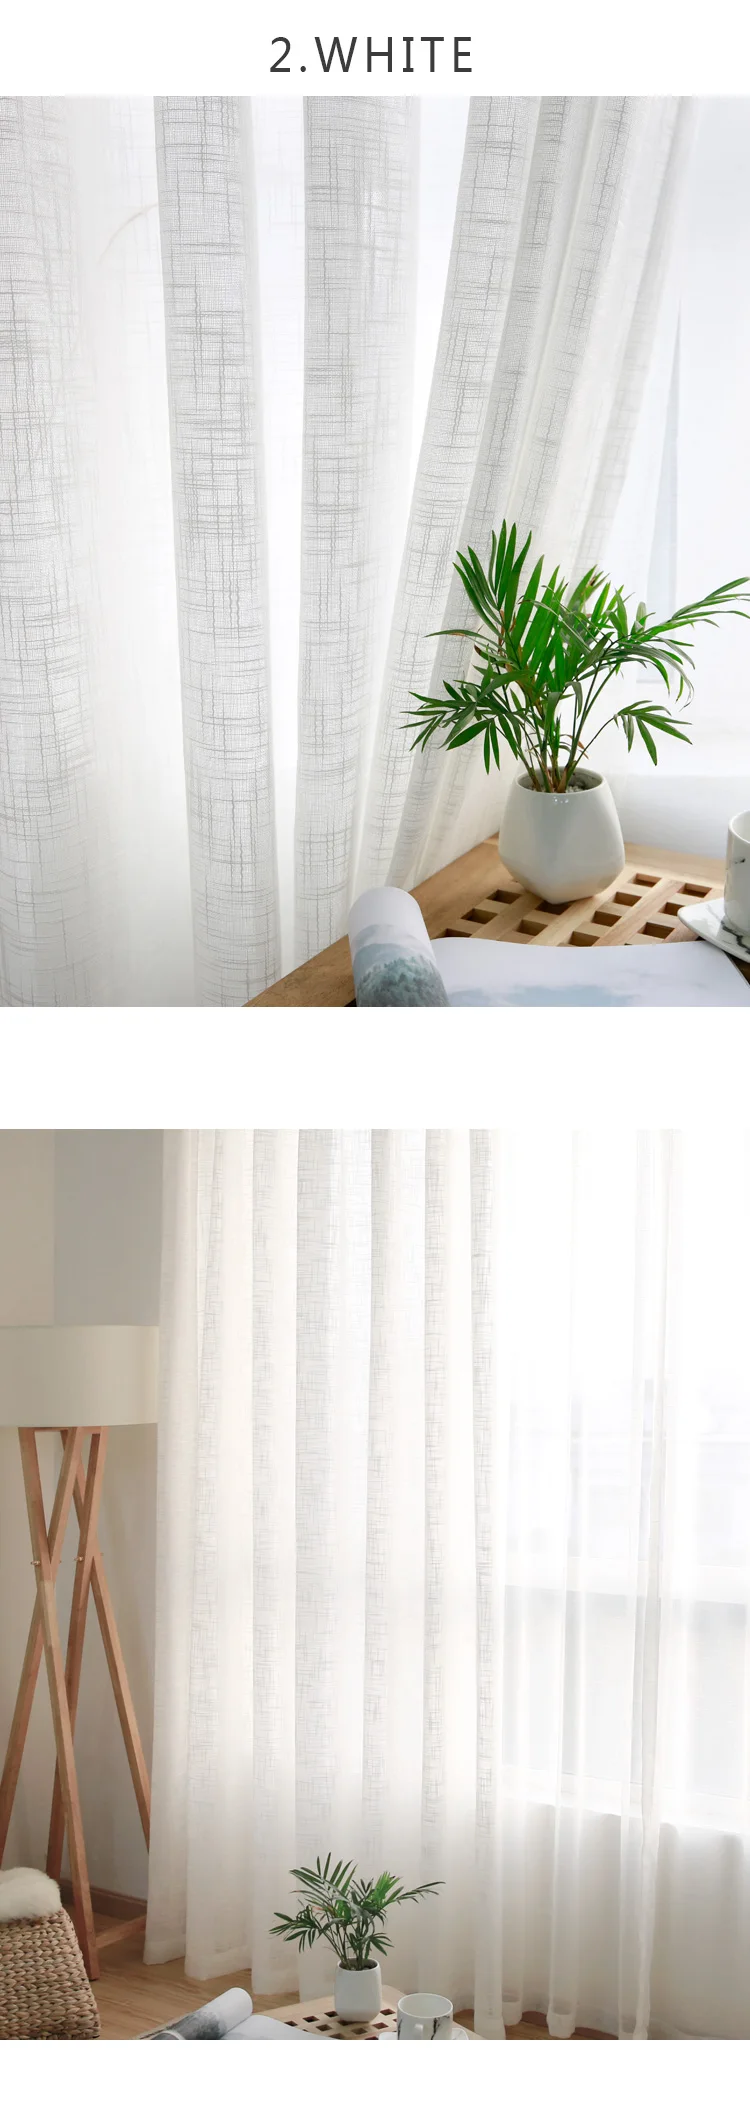 CITYINCITY TulleAmerican Curtains for Living room Soft White Voilesolid Rural Tulle Curtain for bedroom ready made curtain08